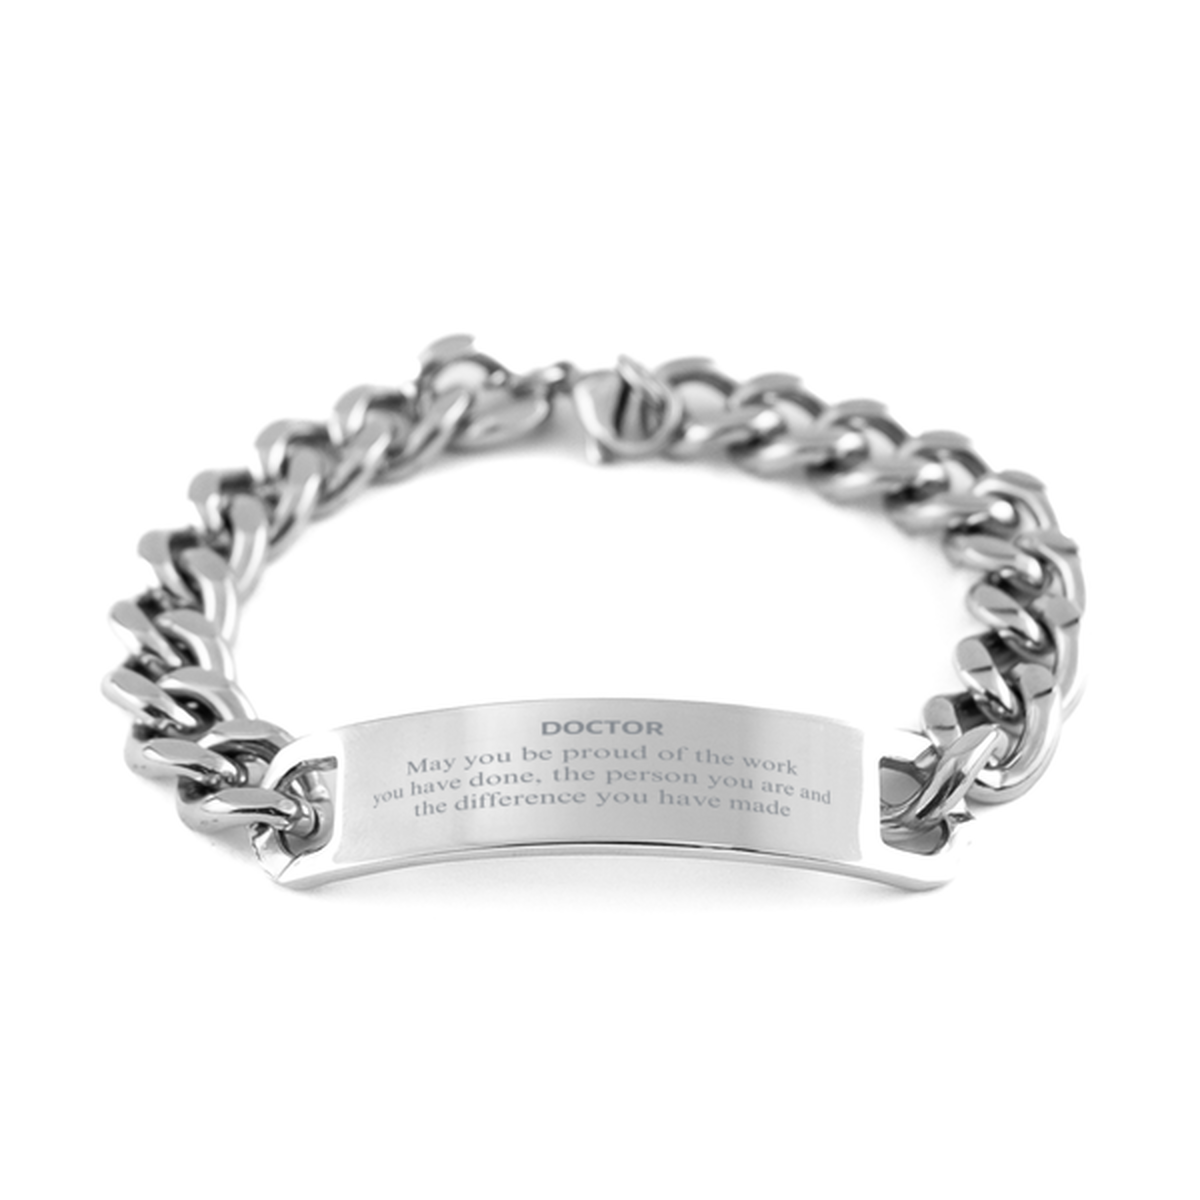 Doctor May you be proud of the work you have done, Retirement Doctor Cuban Chain Stainless Steel Bracelet for Colleague Appreciation Gifts Amazing for Doctor